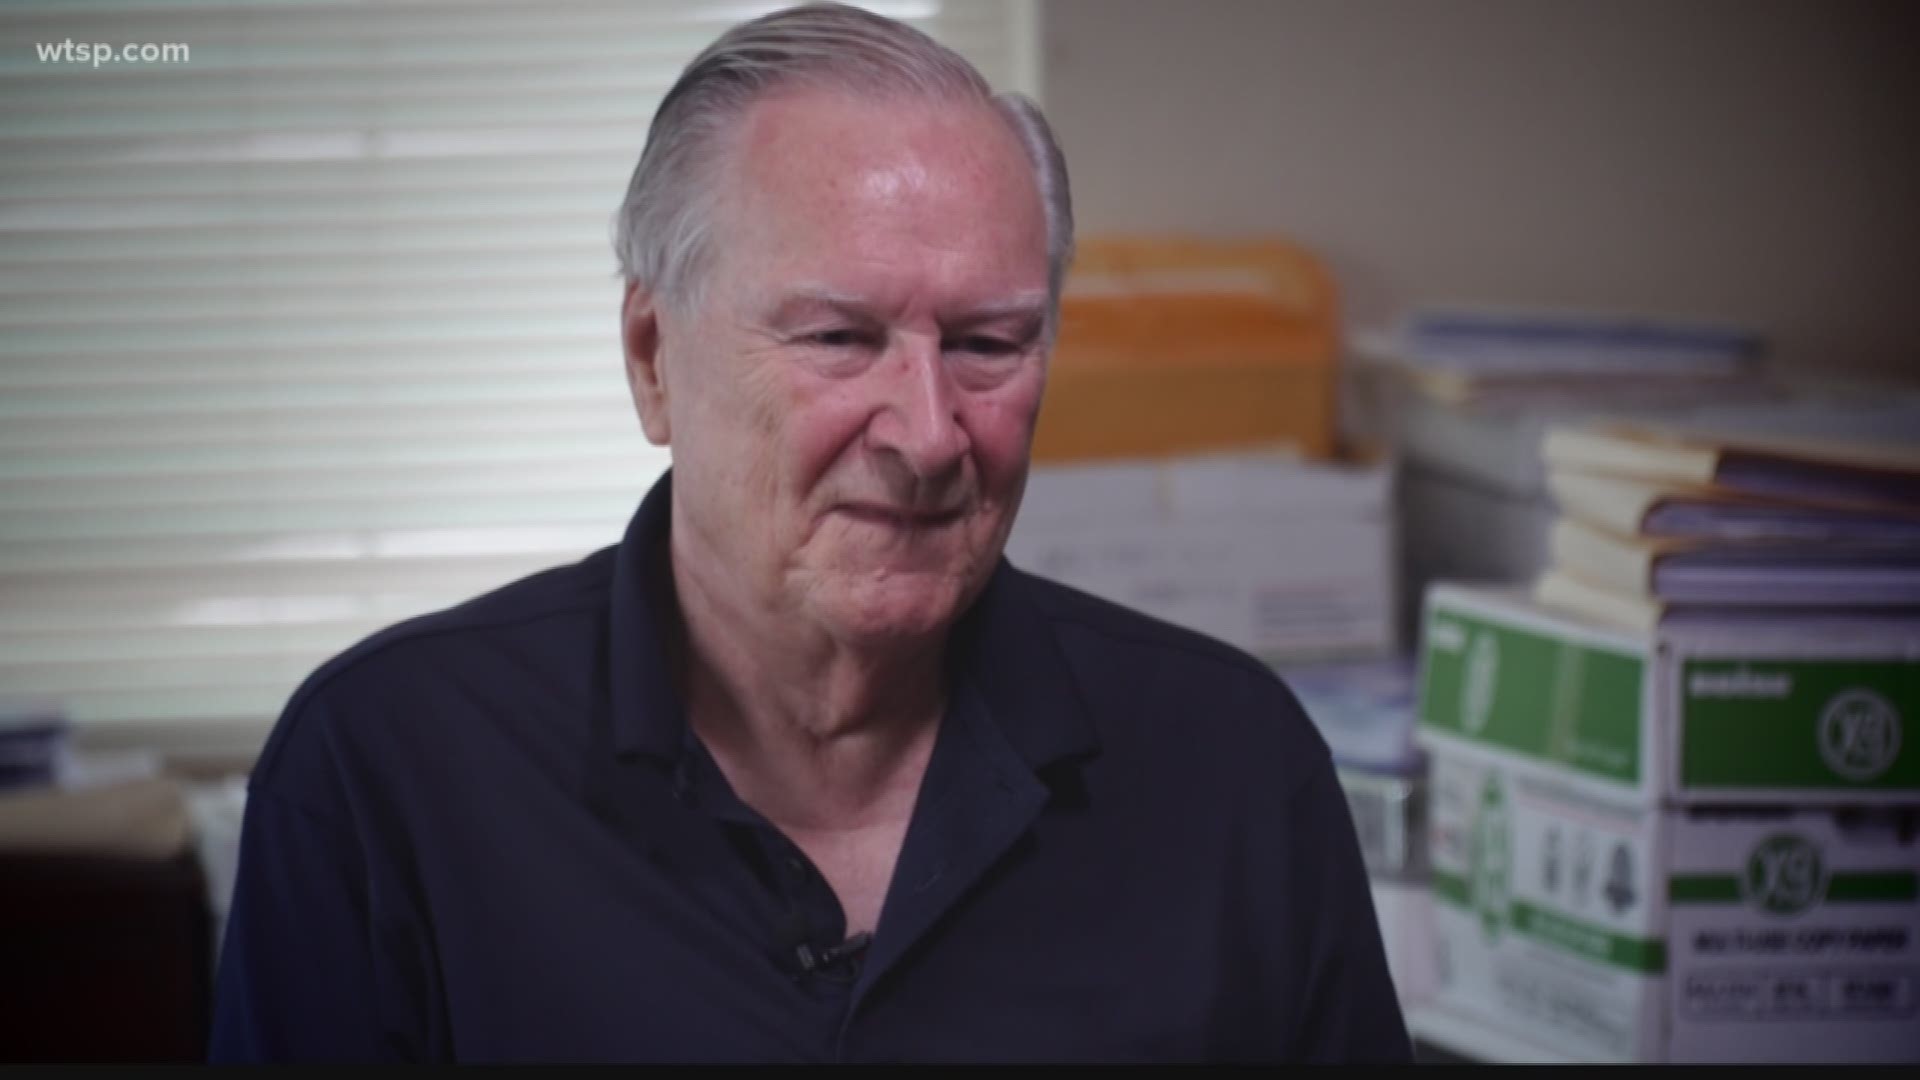 Curtis Rogers, 80, creator of GEDmatch, has no history in law enforcement. He said he's connected to the capture and arrest of the Golden State Killer "through a hobby." Police said they tracked him through his family tree by checking crime scene DNA against GEDmatch databases. Like other genealogy sites, users volunteer their genetic codes to plot family trees and discover new relatives and ancestors.